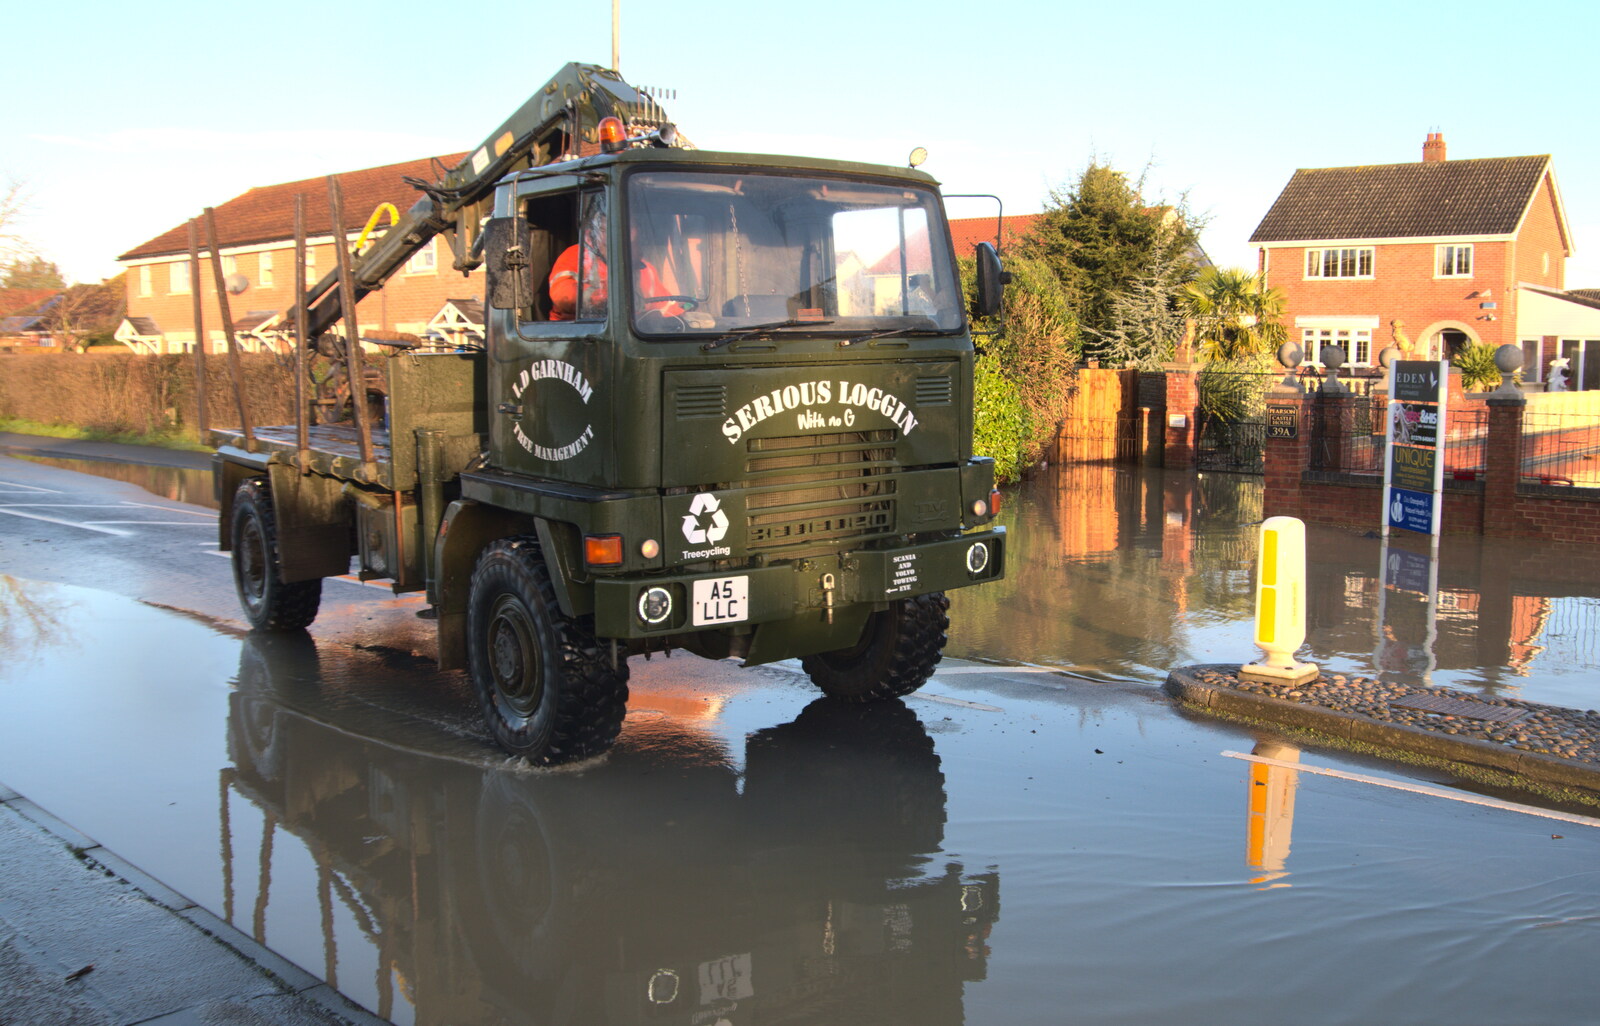 The Serious Loggin' lorry has the wheels for it from The Christmas Eve Floods, Diss, Norfolk - 24th December 2020